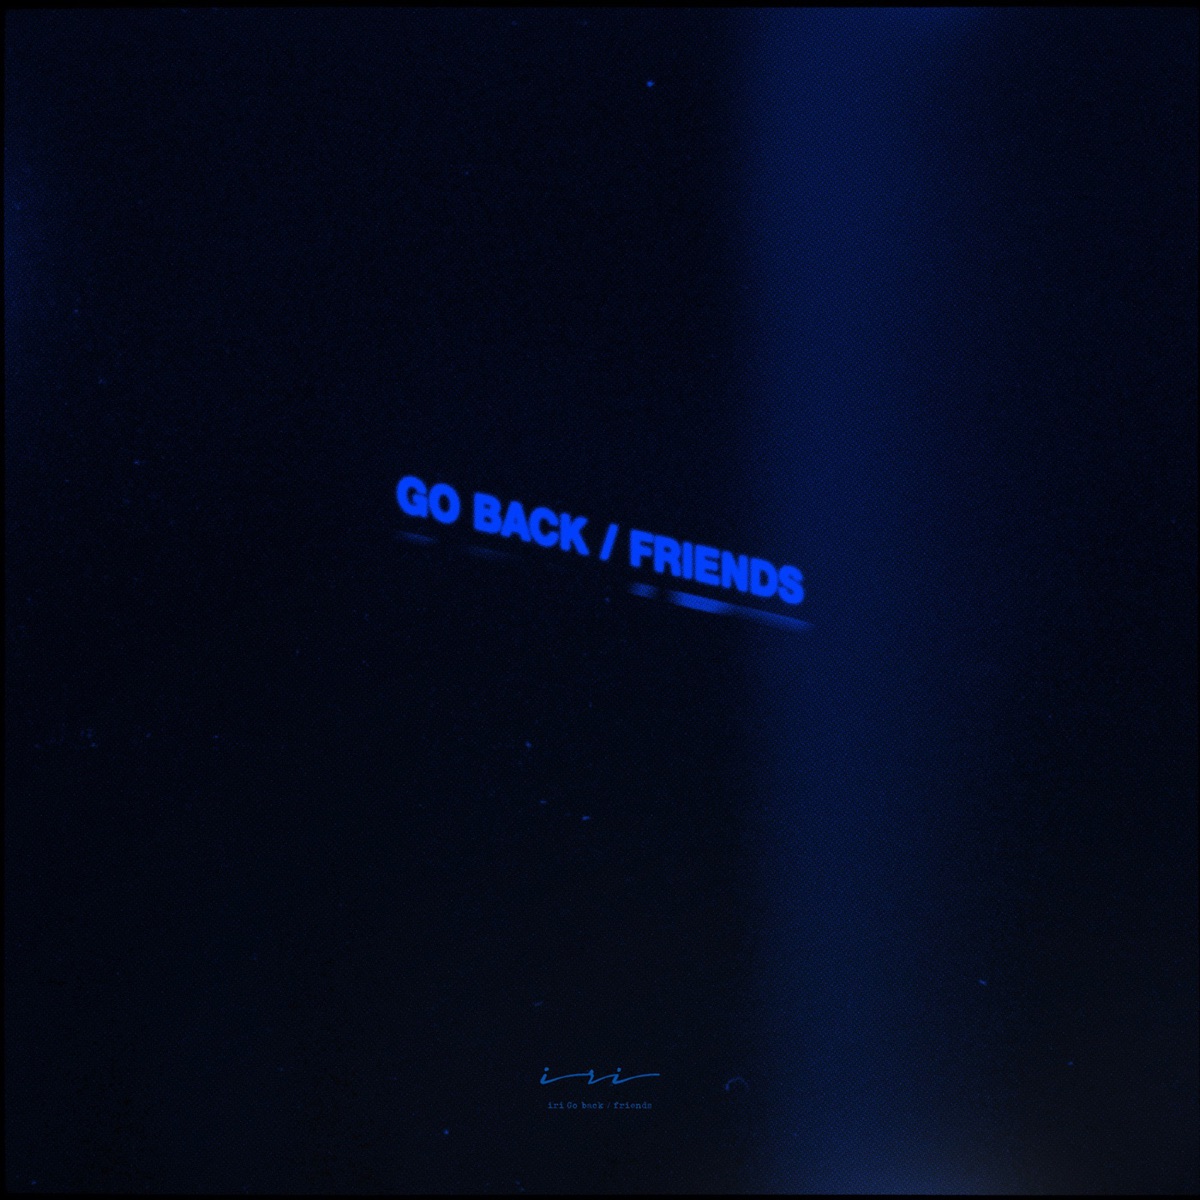 Cover art for『iri - Go back』from the release『Go back / friends』